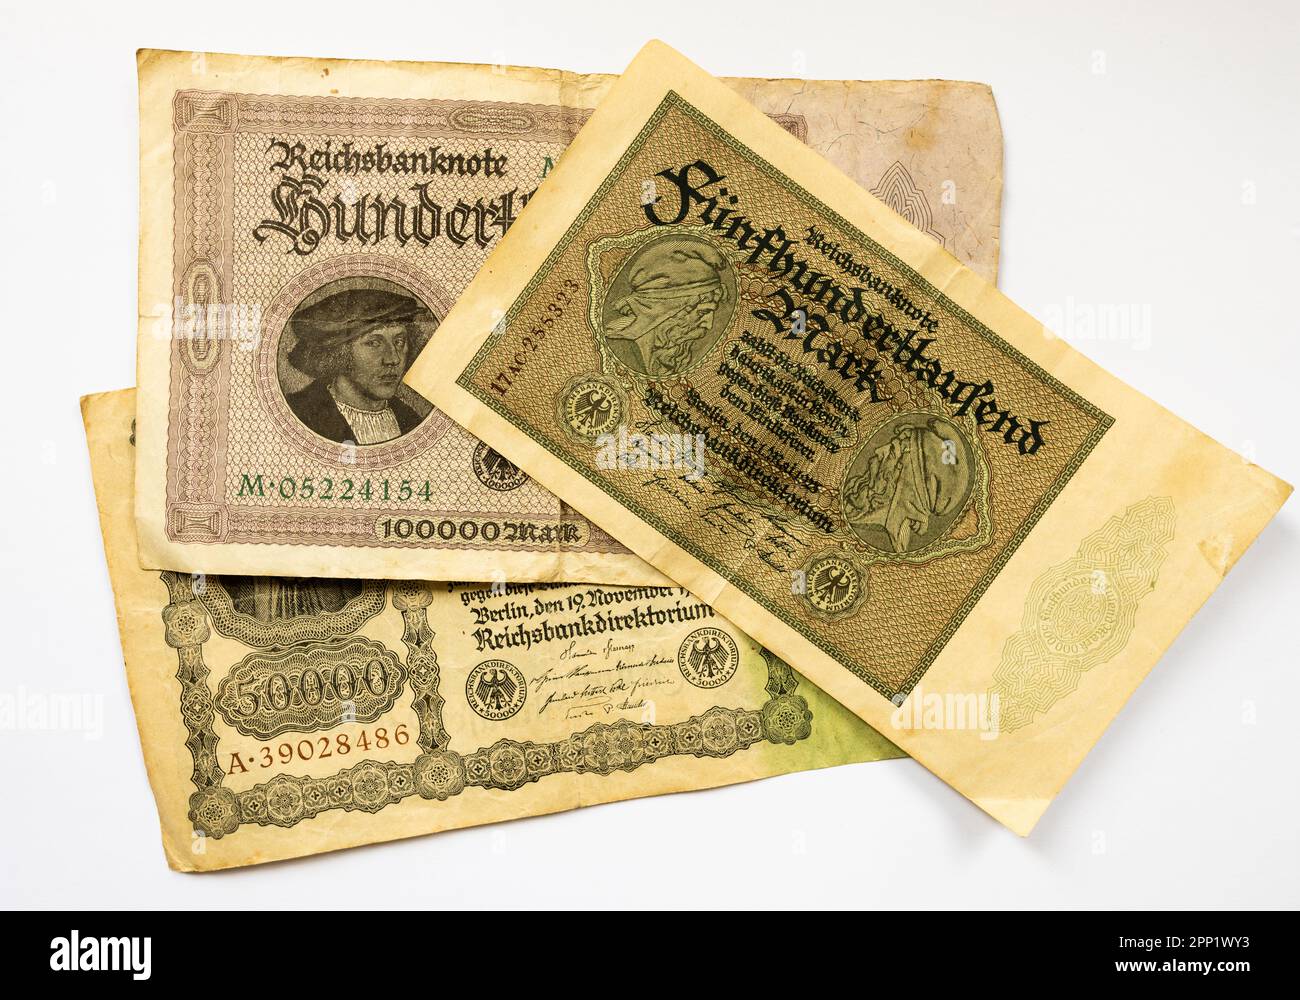 Banknotes of the inflation in 1923 in Germany. Old money from the Reichsbank lying around. Historical currency during a big recession. Stock Photo